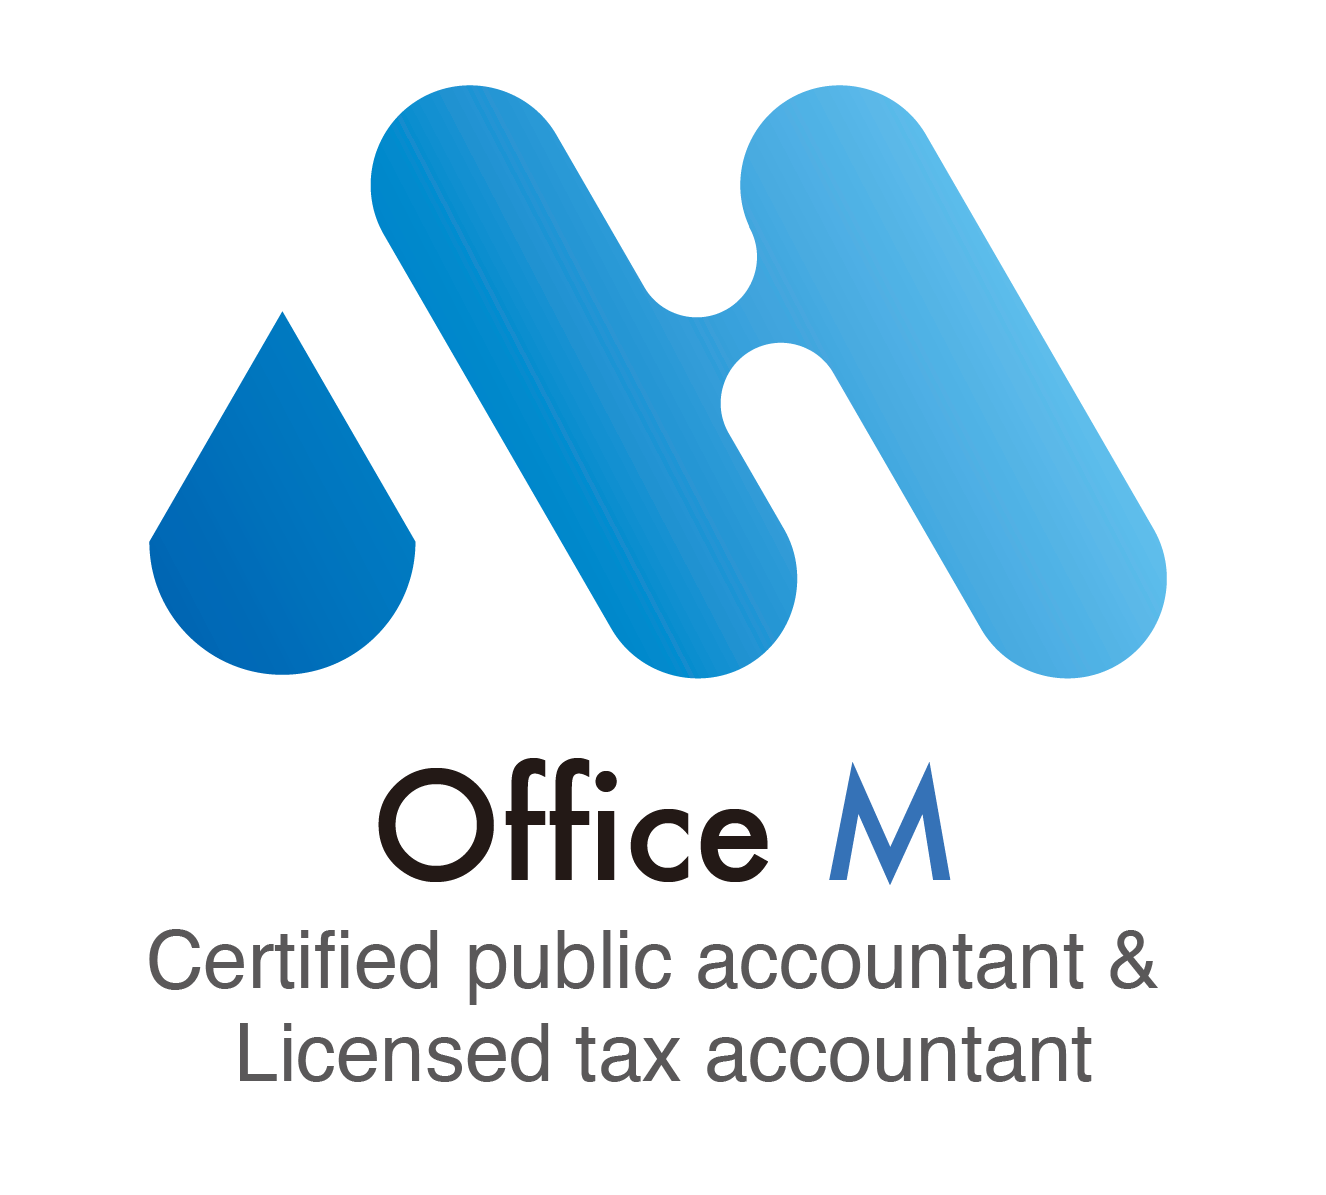 Profile Picture− Certified public accountant & Licensed tax accountant